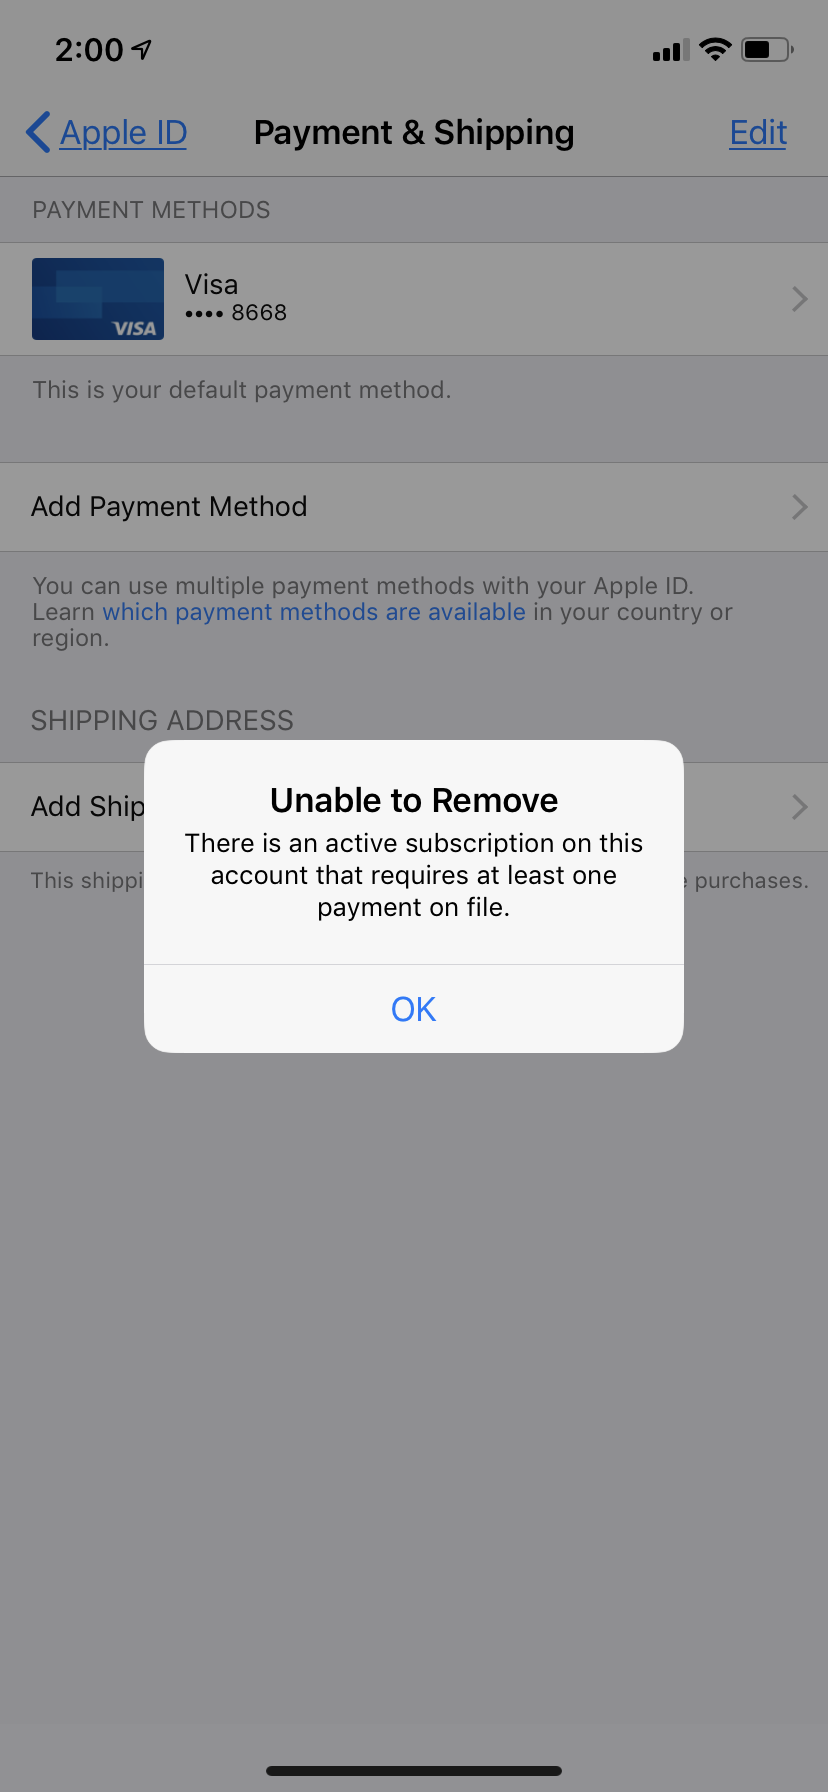 Why won't Apple let me remove my payment method?